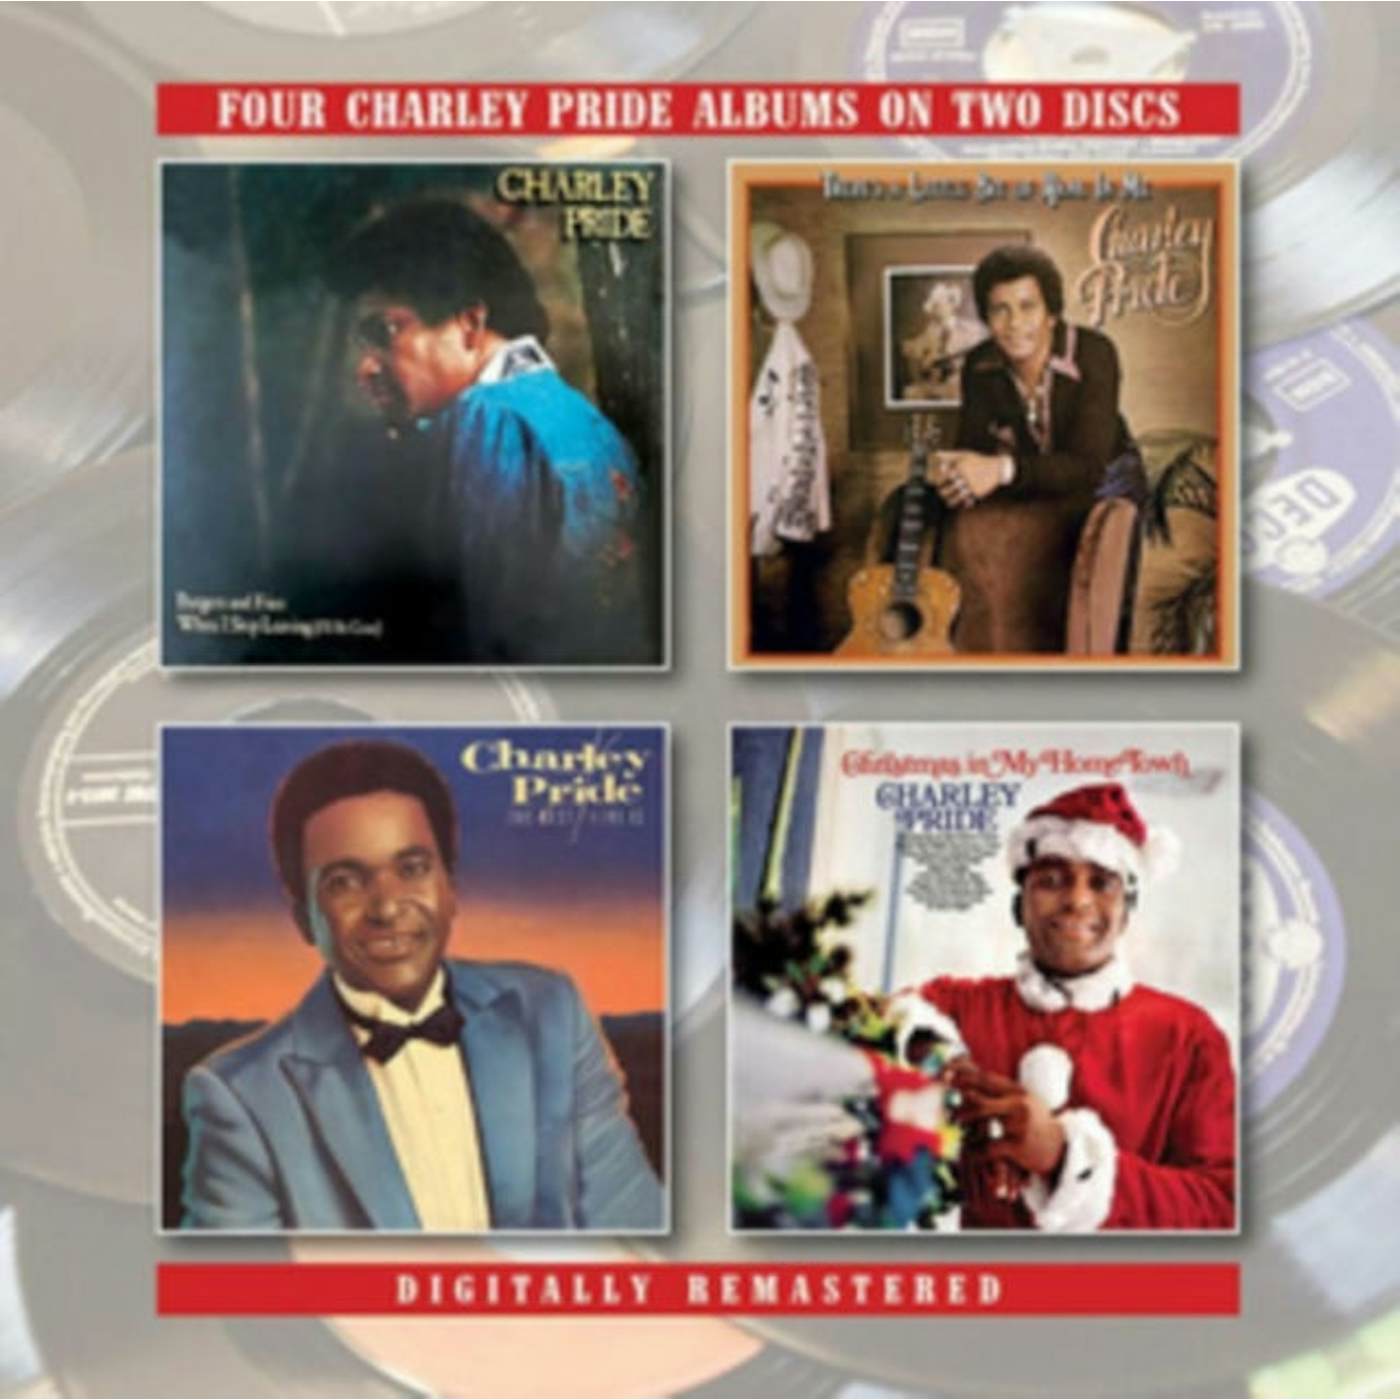 Charley Pride CD - Burgers And Fries - When I Stop Leaving (I'll Be Gone) / There